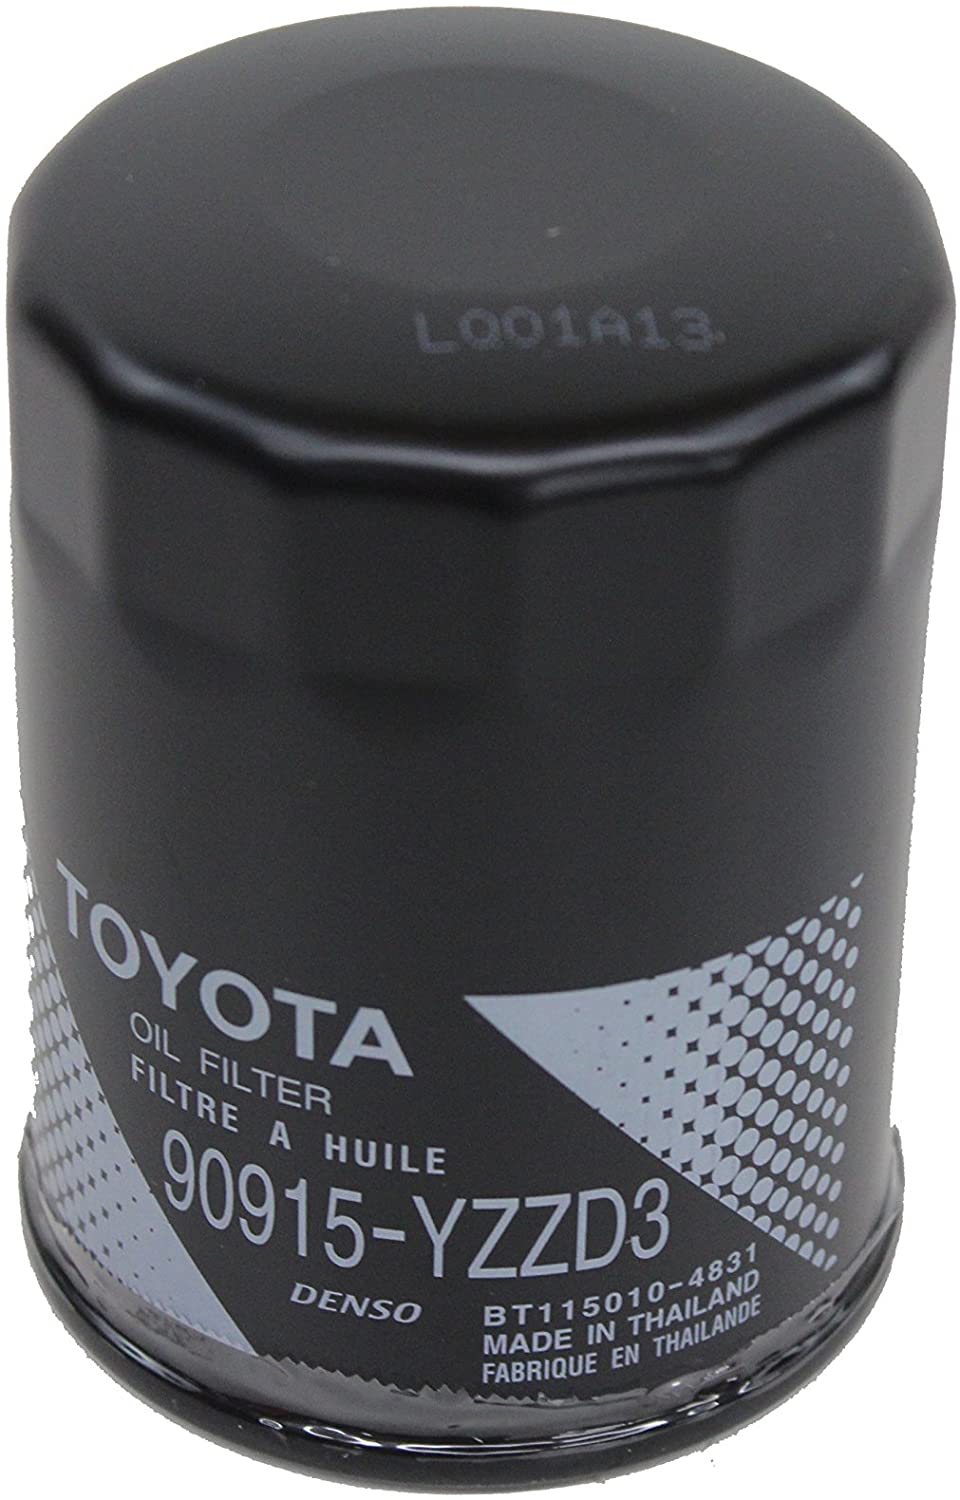 10 Best Oil Filters For Toyota Tundra - Wonderful Engineerin